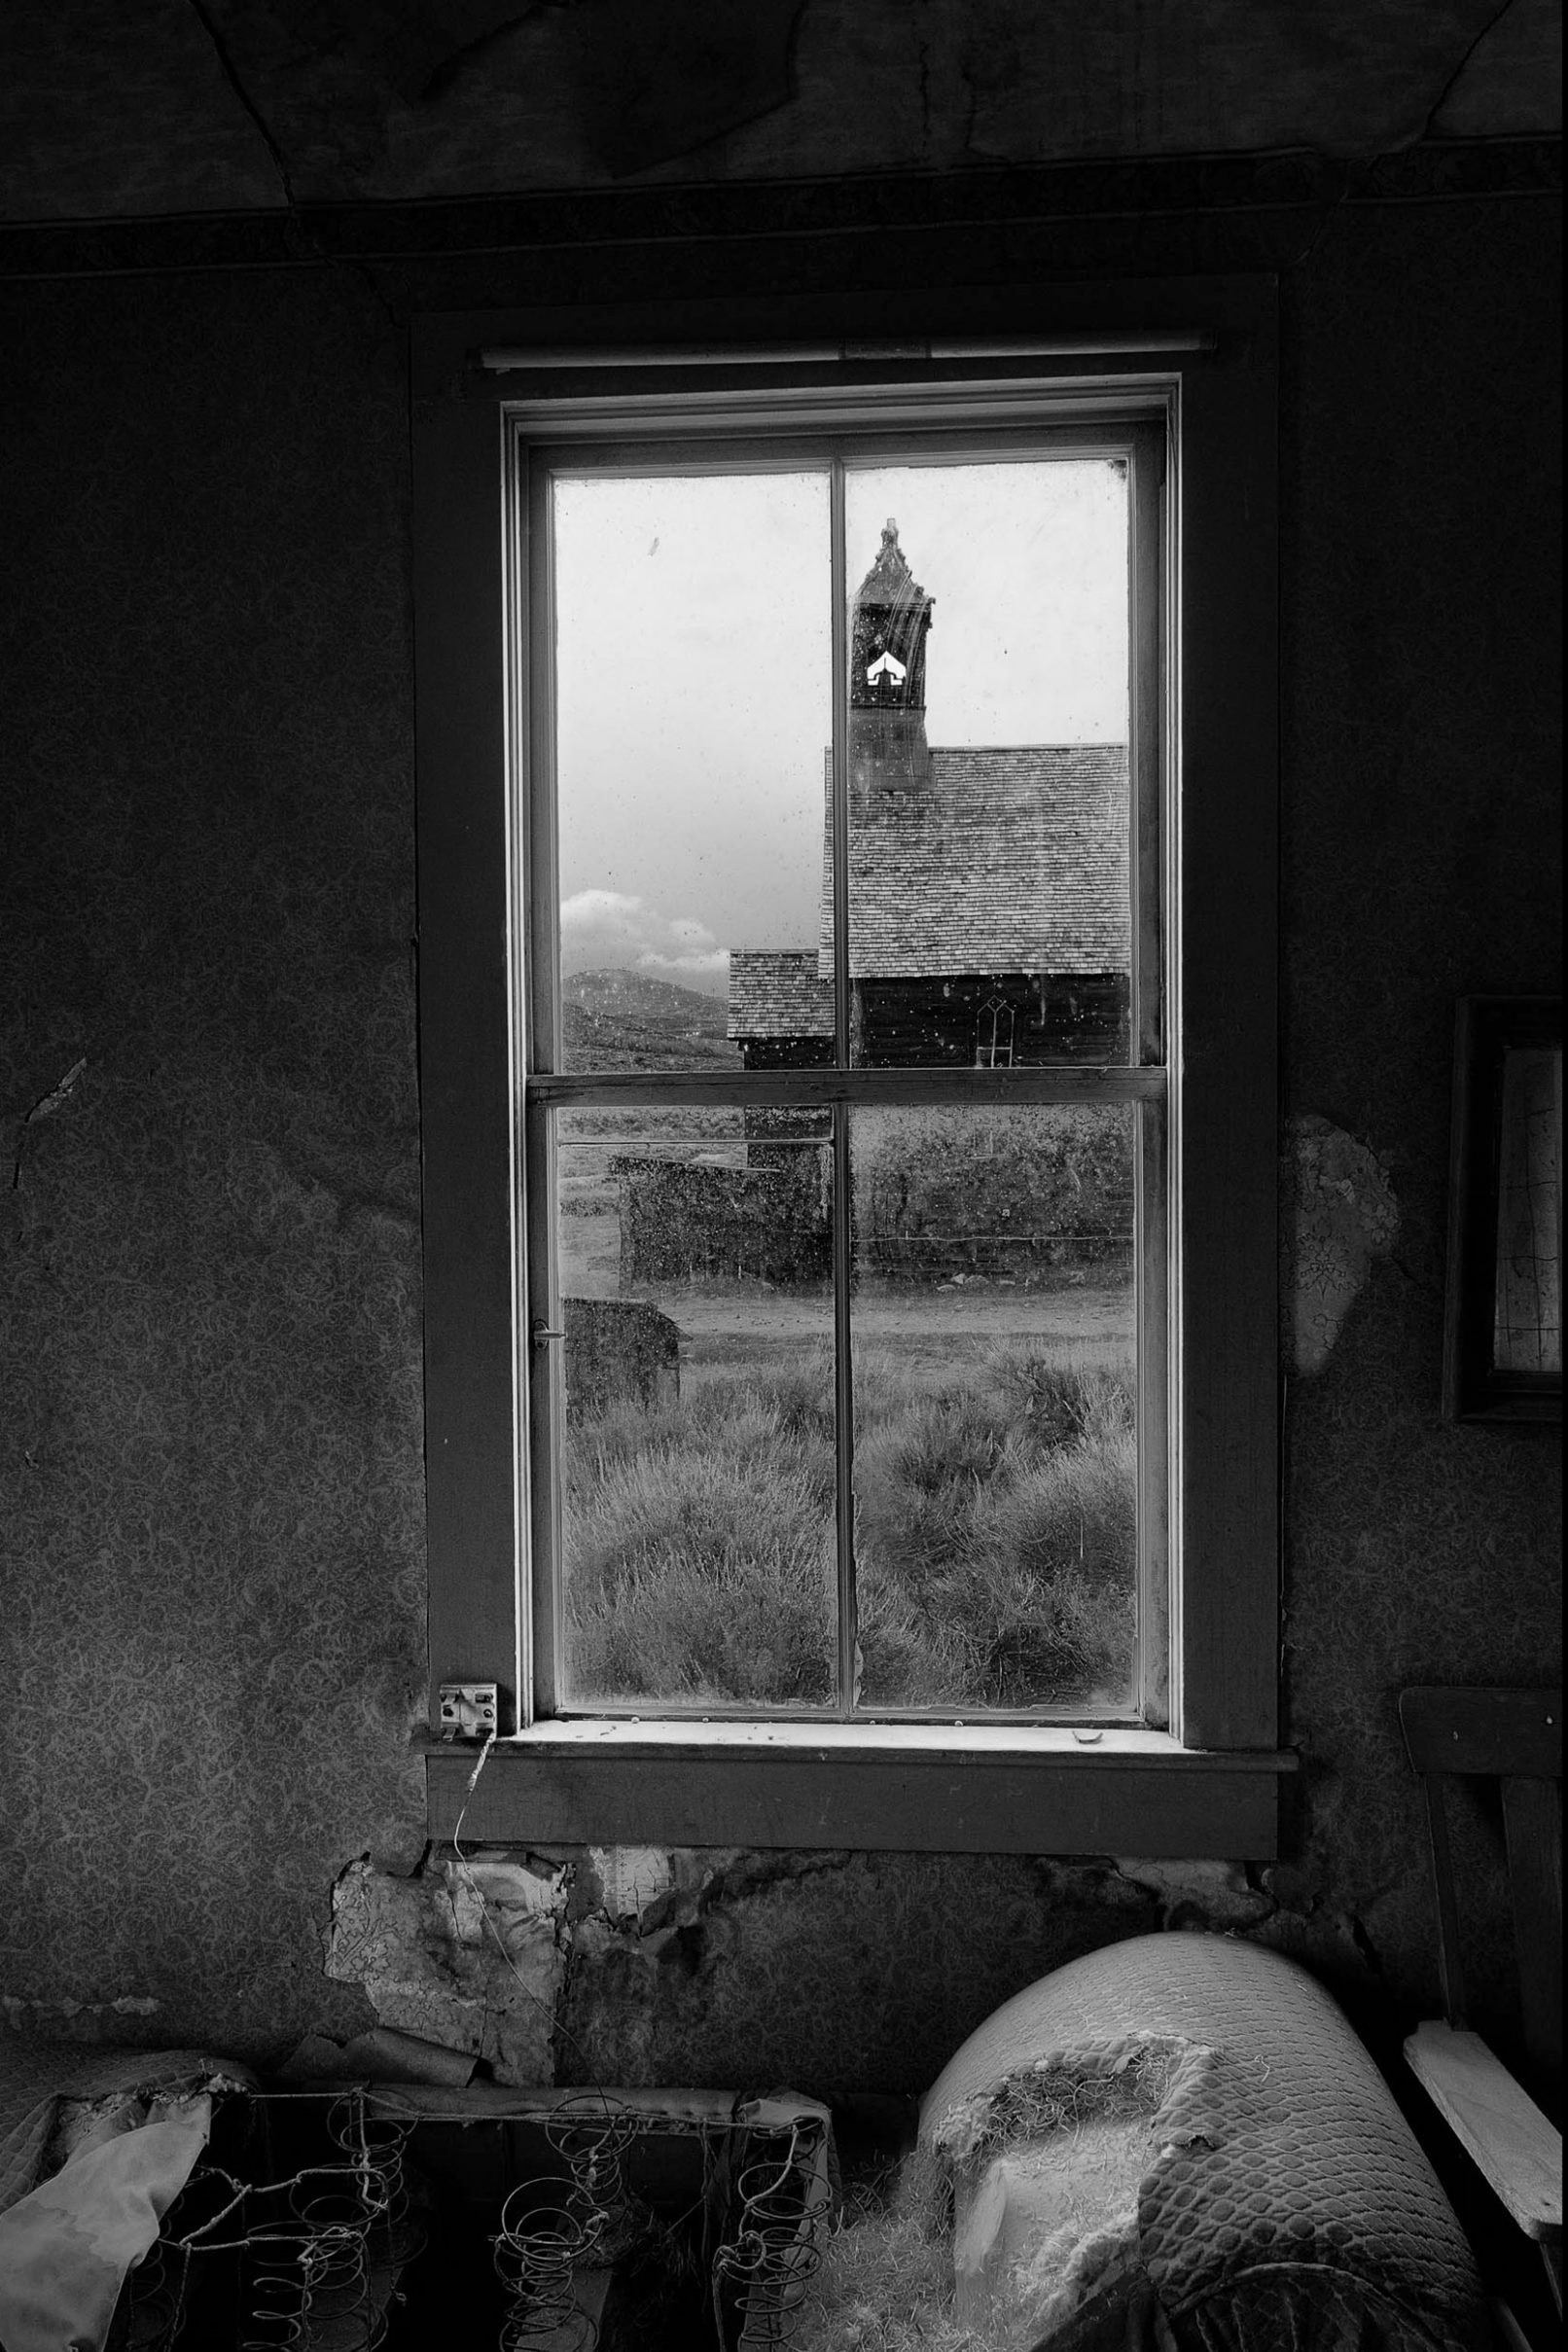 View of church from window in Bodi, California ghost town